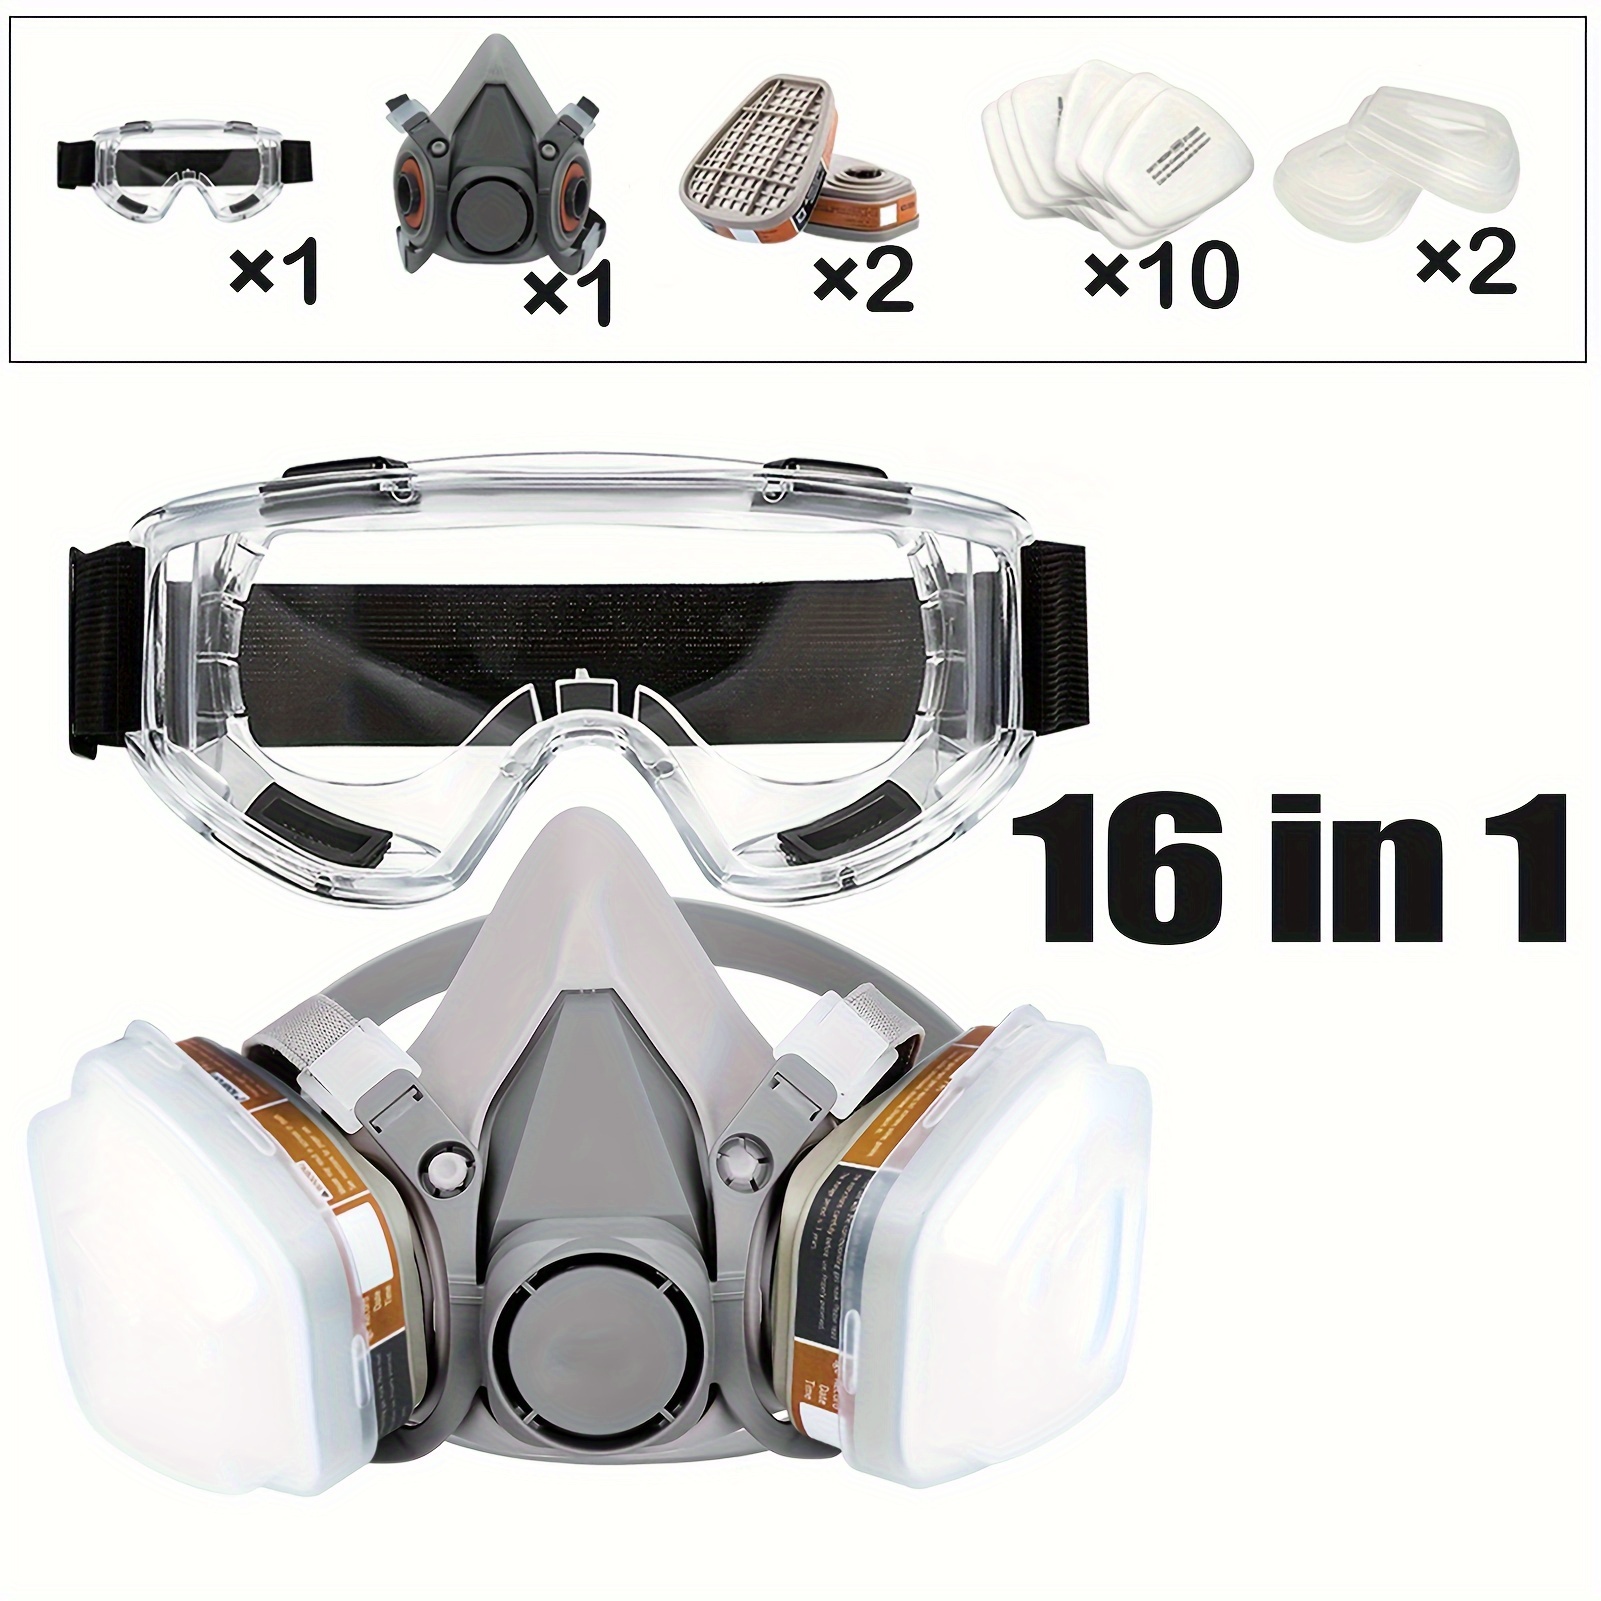 

16 In1 Reusable Half Face Cover Set, Half Face Respirator, Personal Protective Equipment Filter For Painting, Decorating Carpentry, Welding, Metal Cutting, Same Scene As 6000 6200 7000 Ff-400